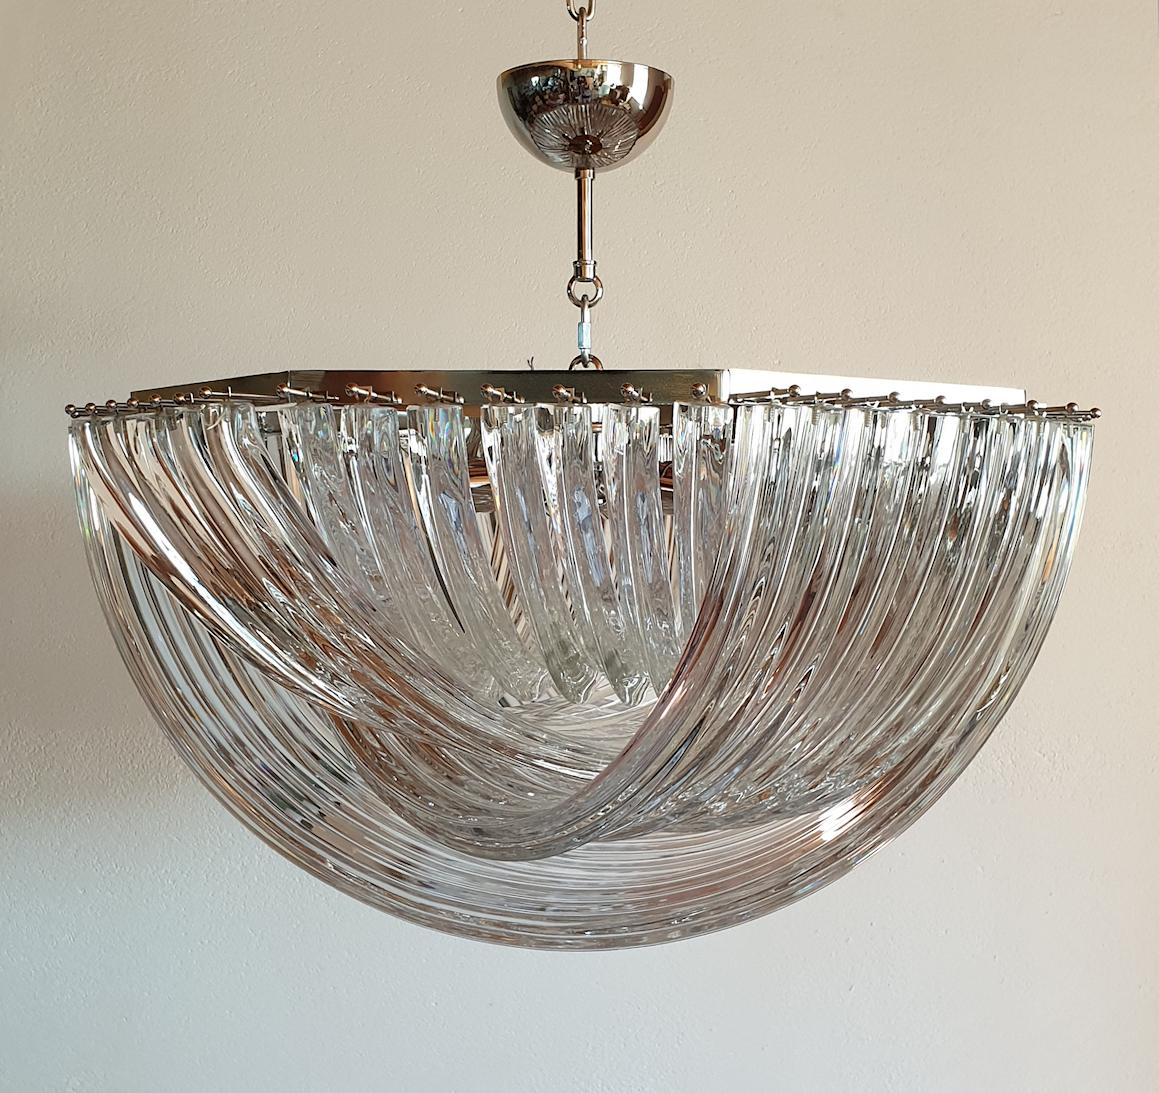 Large Mid-Century Modern round Triedri Venini chandelier or flushmount, clear Murano glass and chrome frame,
Italy, circa 1980s.
Made of four layers of curved handmade Murano glass; excellent quality.
Chrome mounts: Can be hanged with the canopy, or